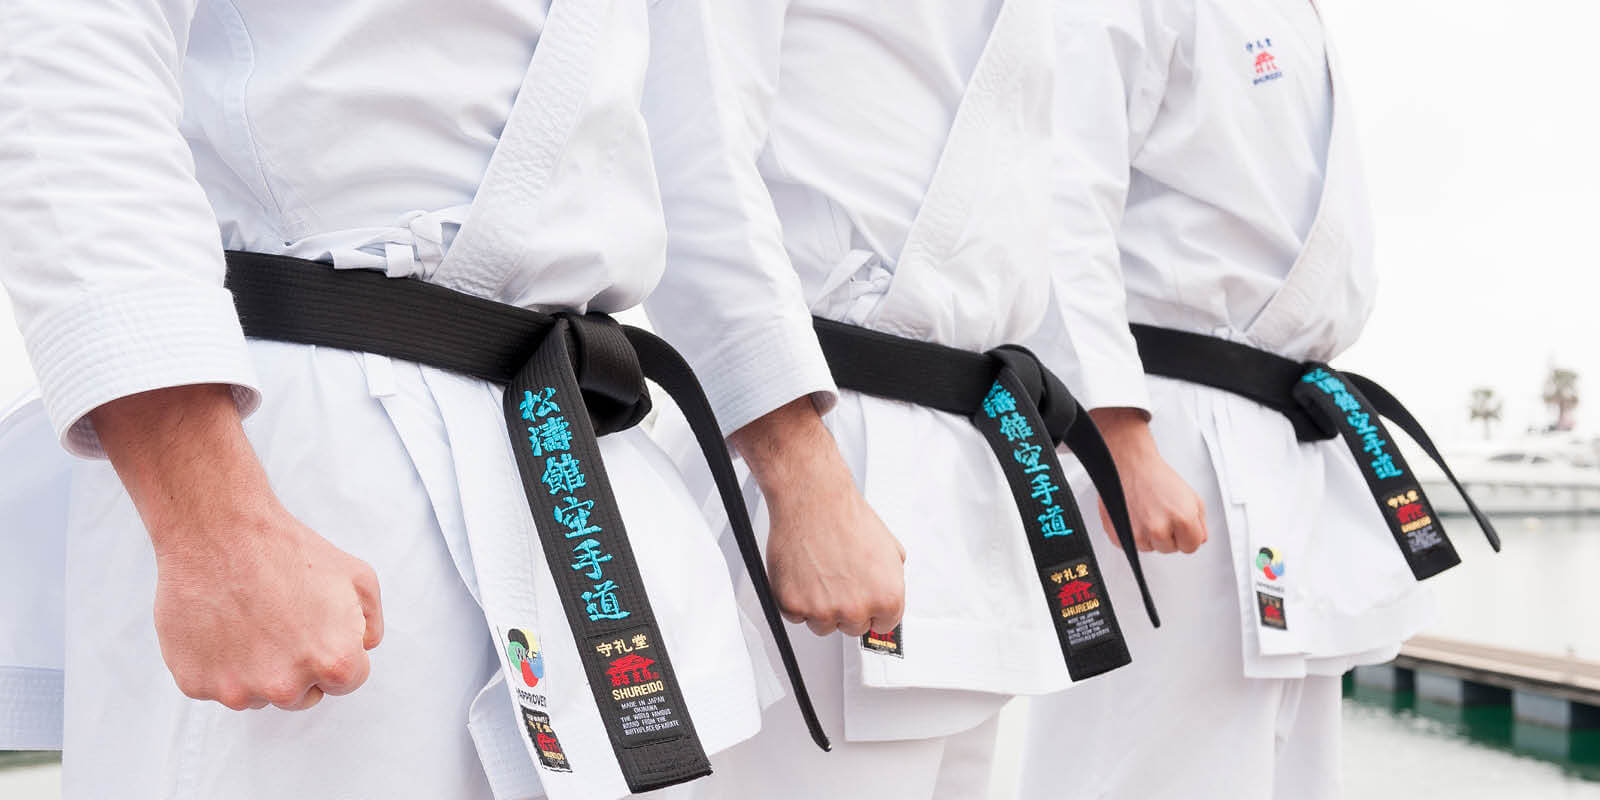 How to differentiate between the different thicknesses of Karate belts